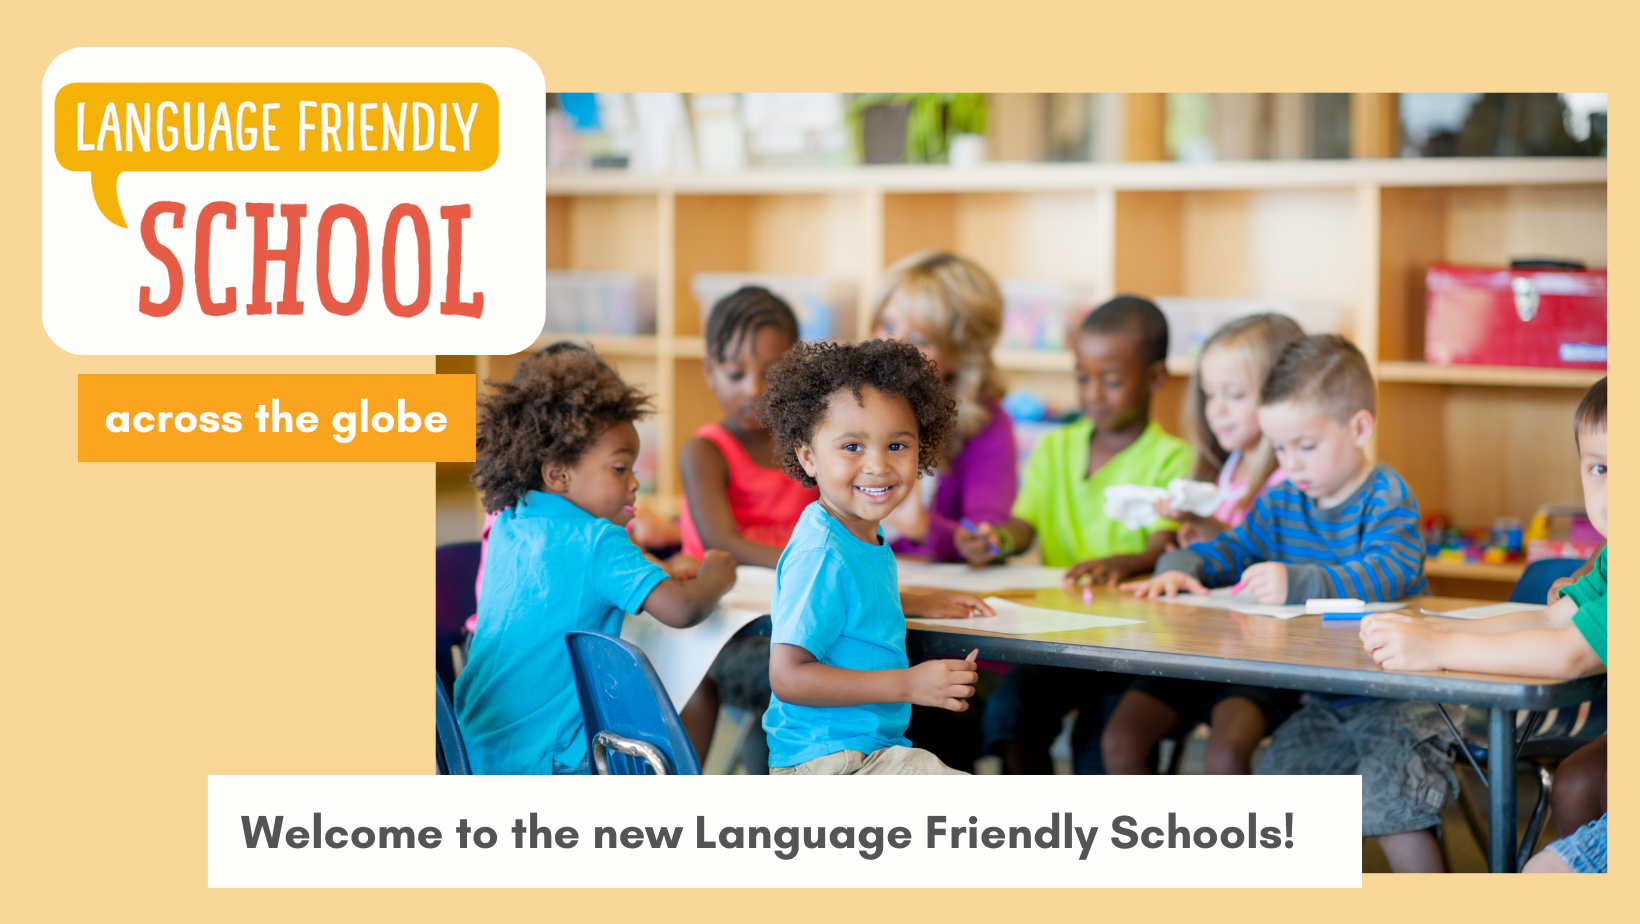 Featured image for “Welcome to our new Language Friendly Schools!”